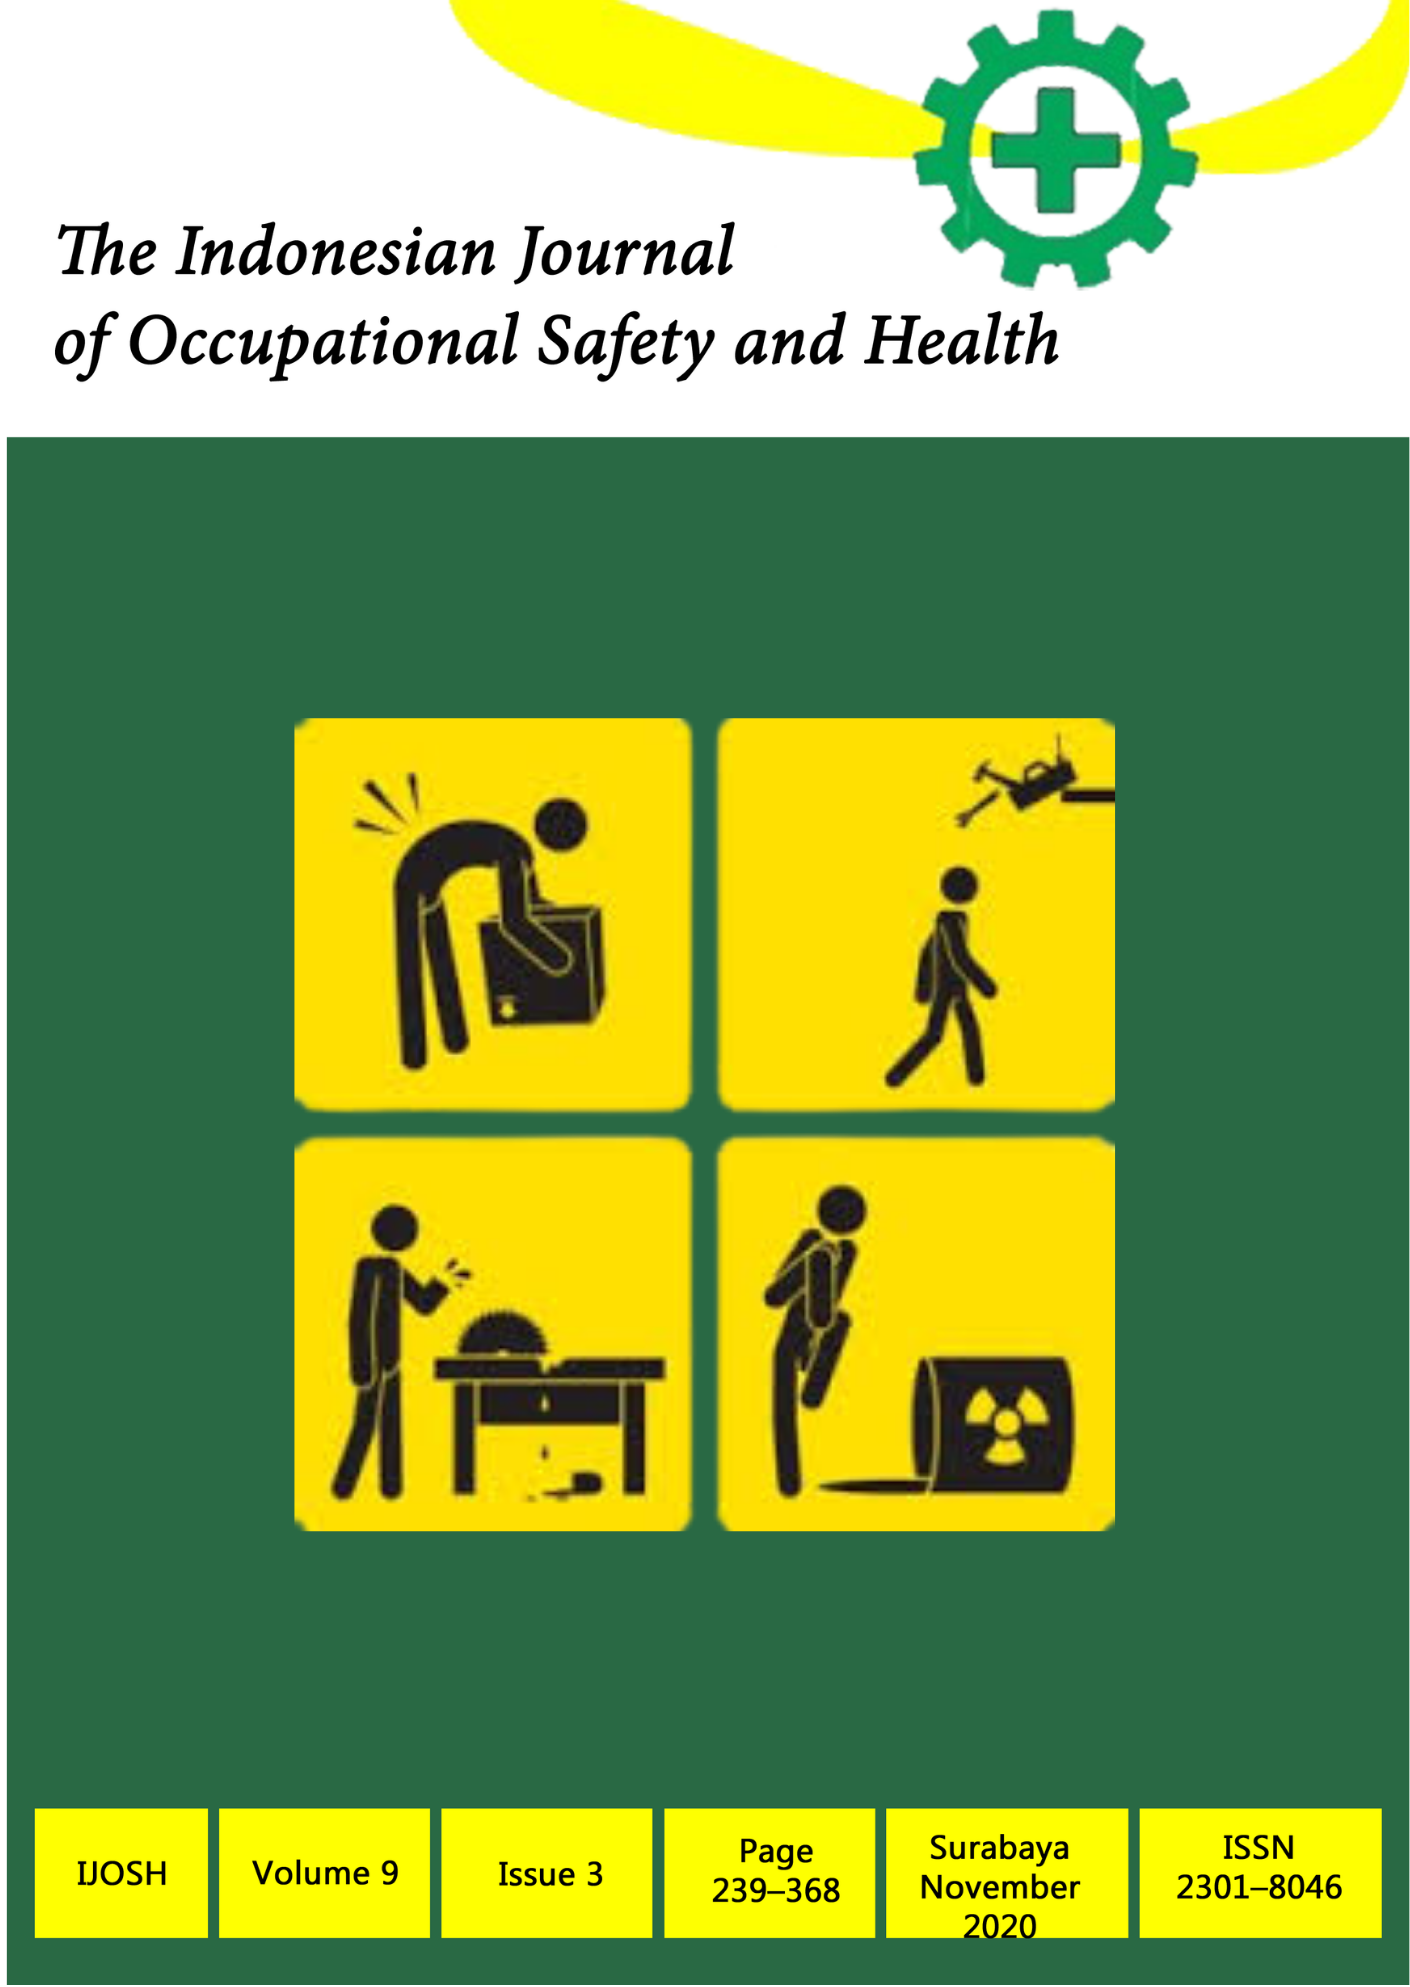 						View Vol. 9 No. 3 (2020): The Indonesian Journal of Occupational Safety and Health
					